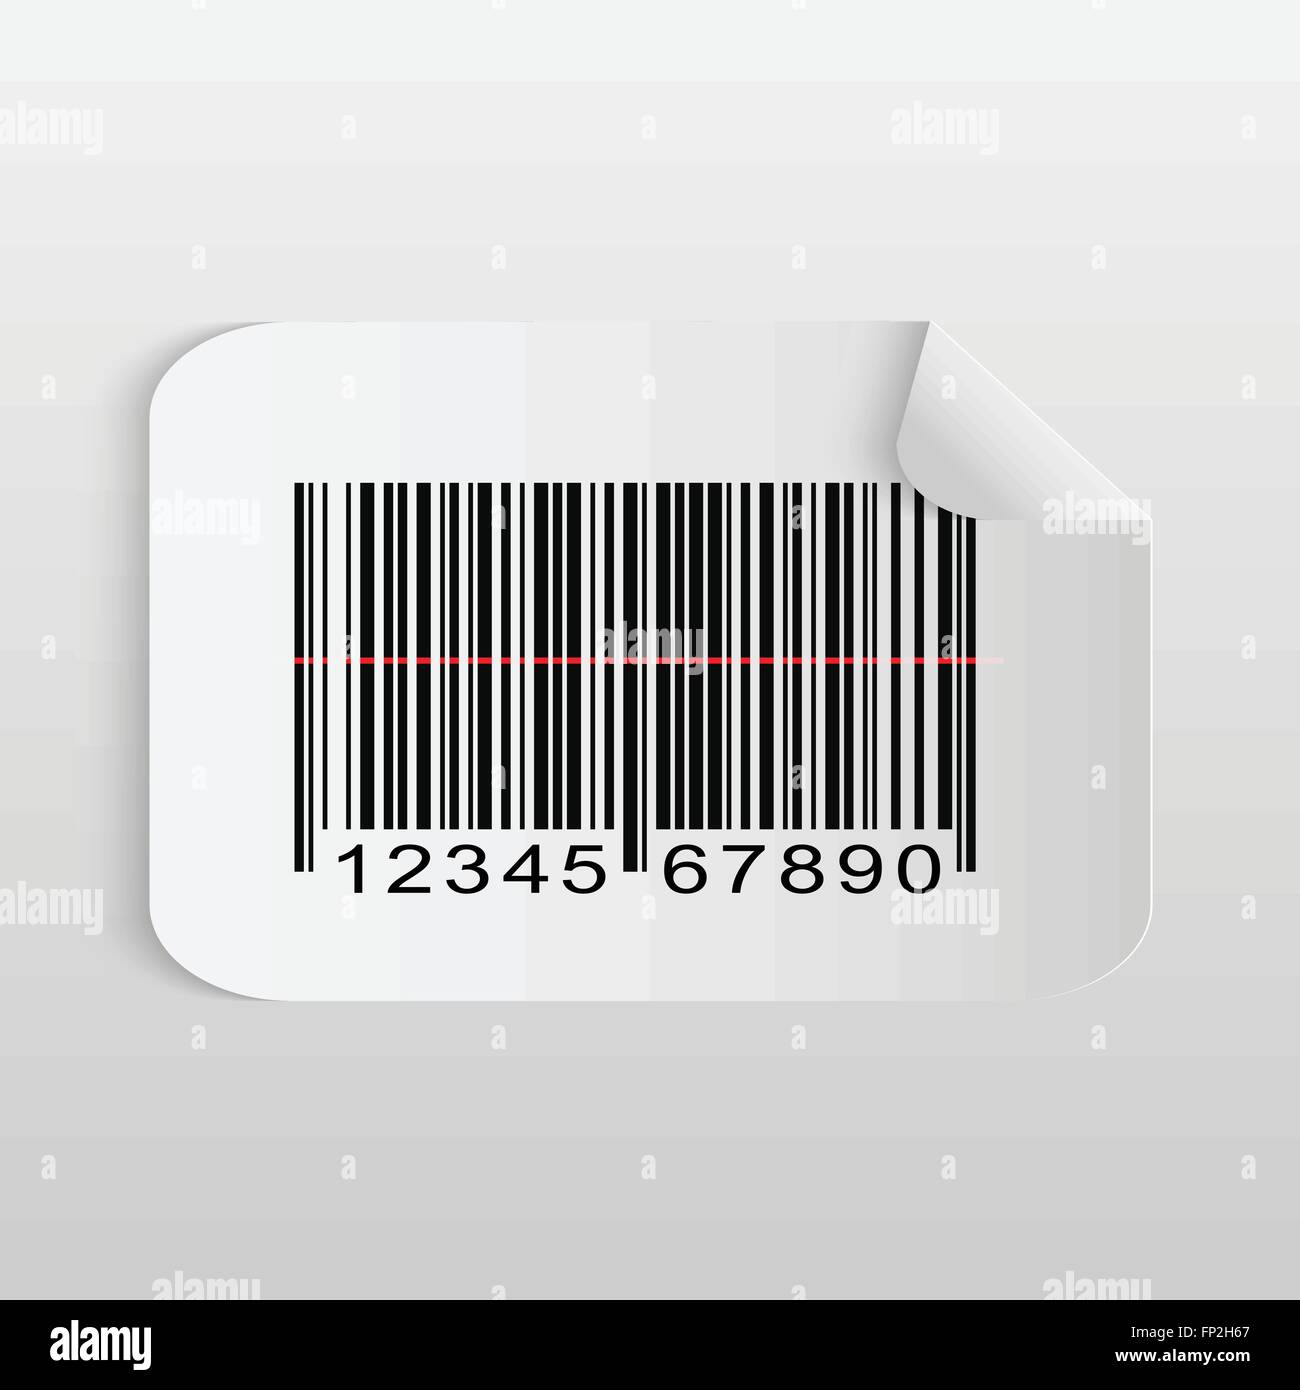 Illustration of a paper barcode sticker isolated on a light background. Stock Vector